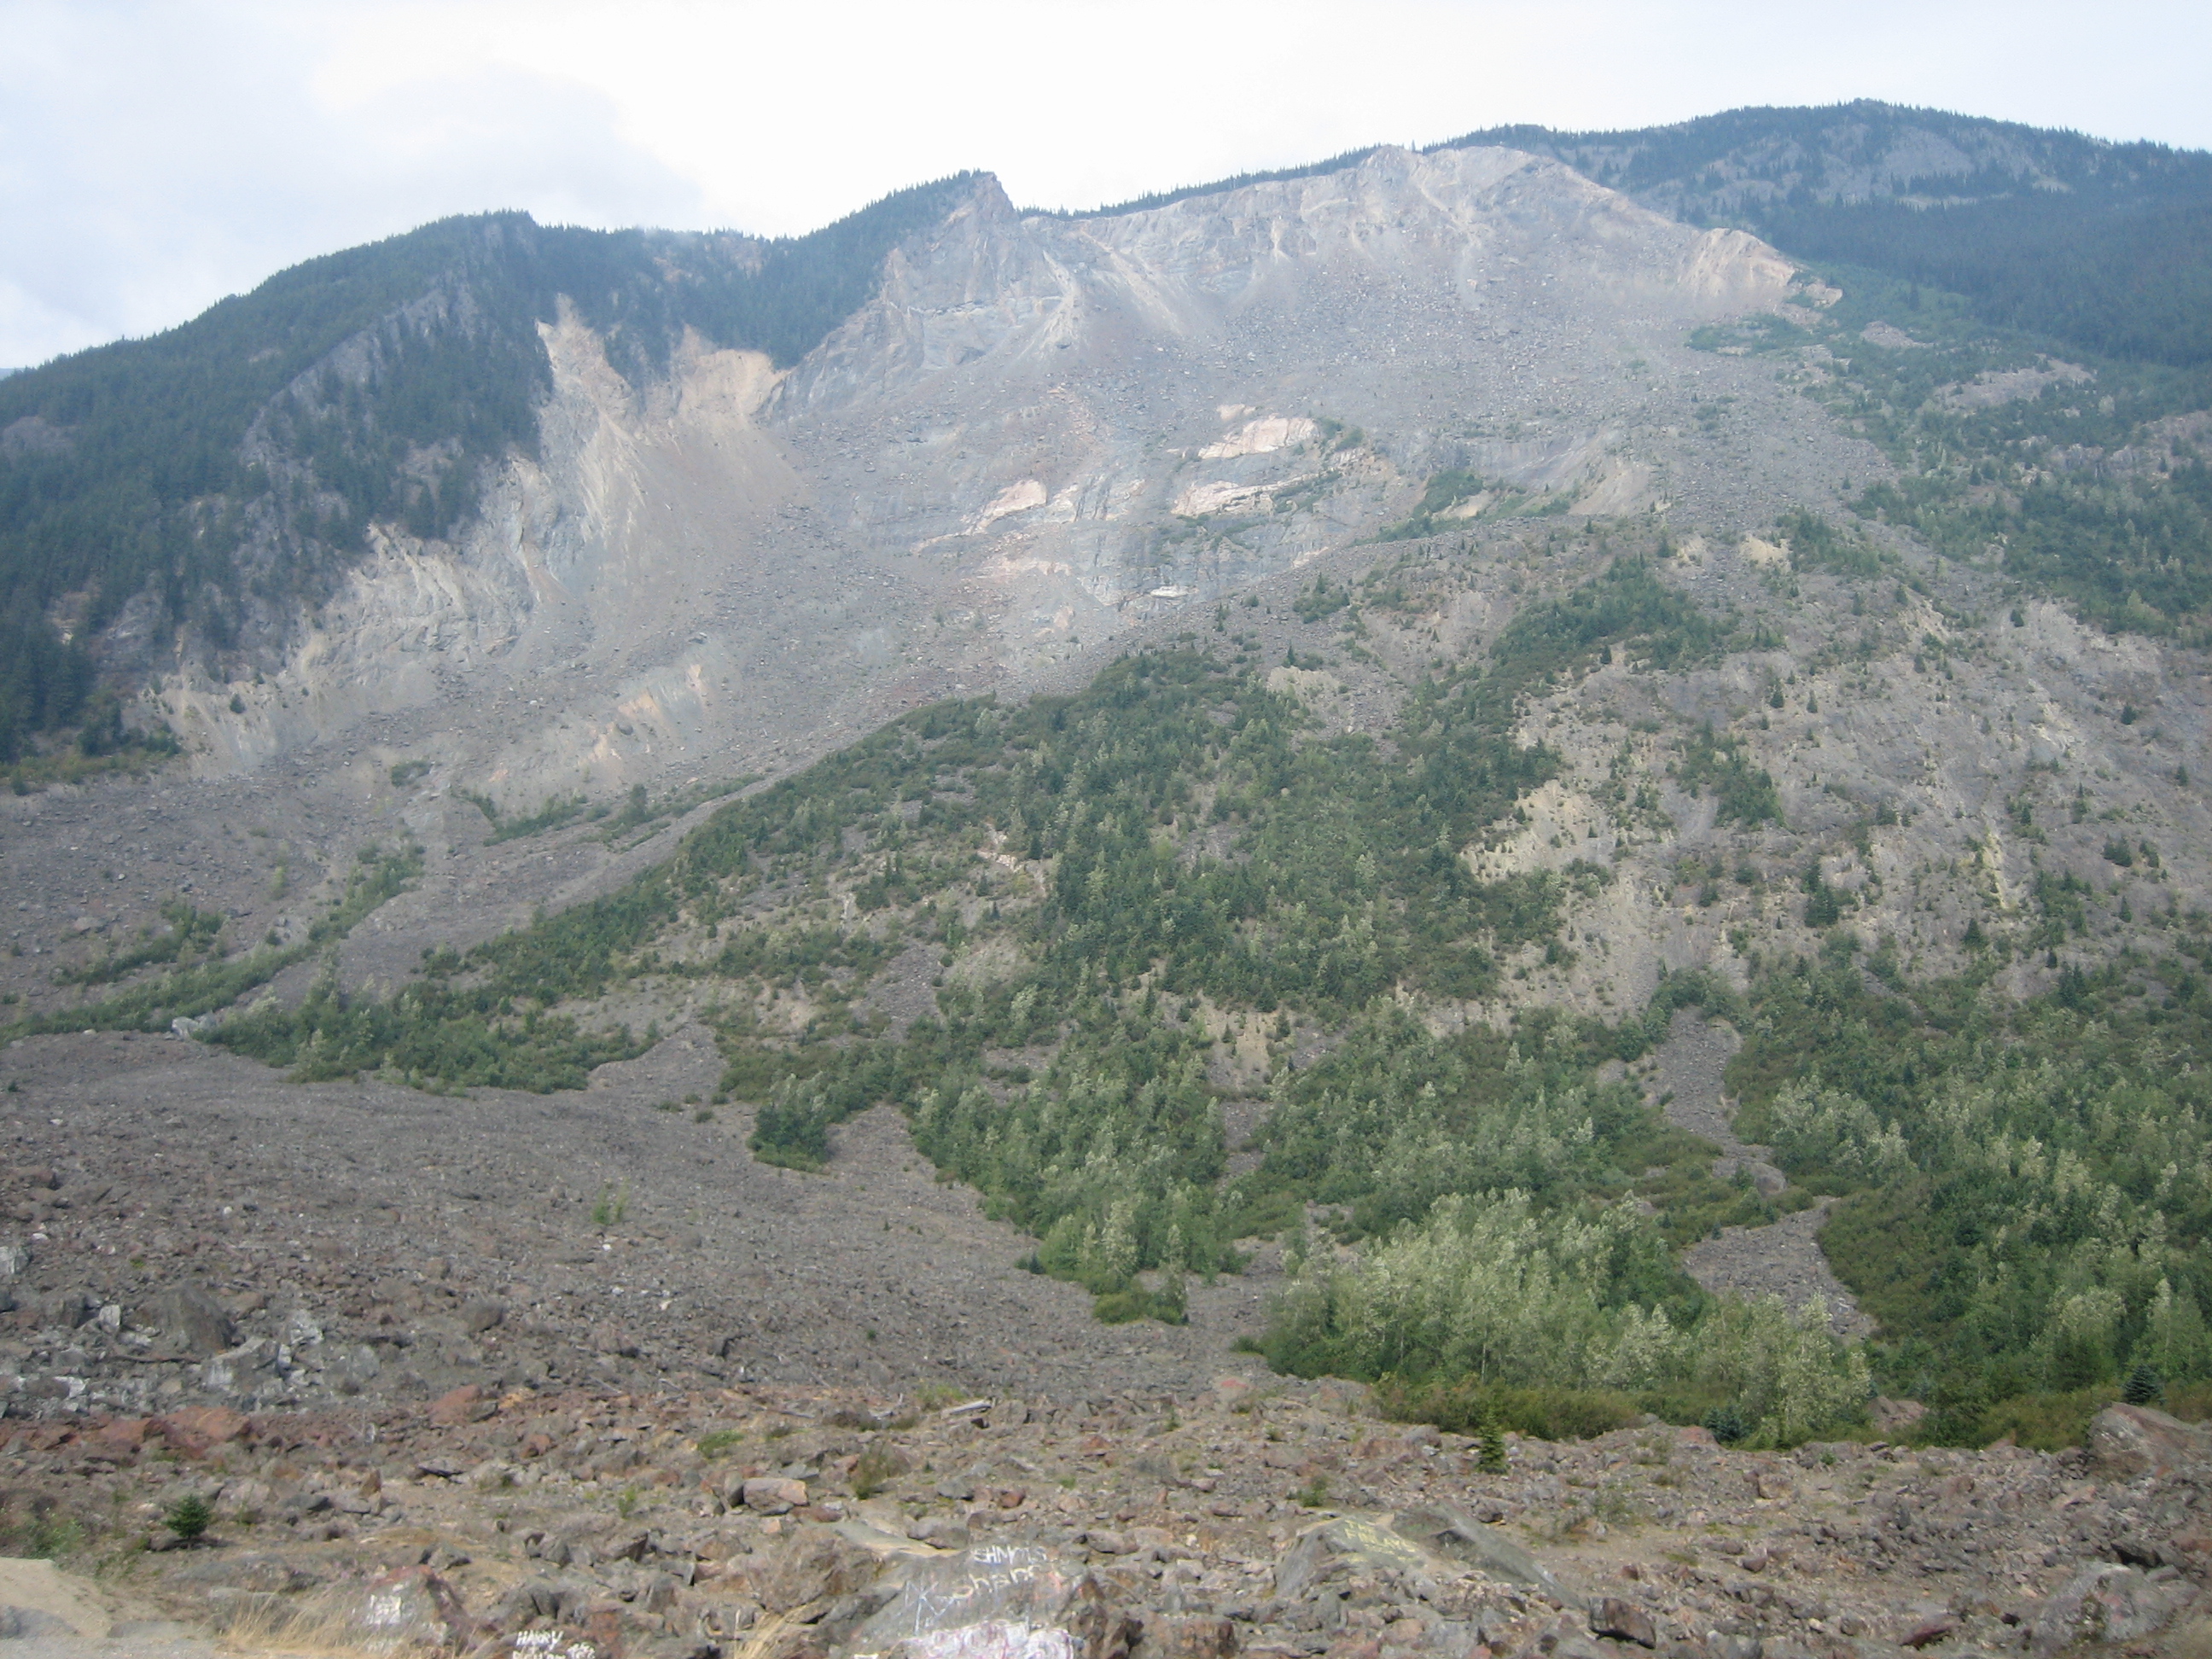 | The site of the 1965 Hope Slide, photographed in 2014. The initial failure is thought to have taken place along foliation planes in the rock and a sill. _Source: Wikimedia Commons. _[View Source](https://en.wikipedia.org/wiki/Hope_Slide#/media/File:Hope_slide,_BC.jpg)